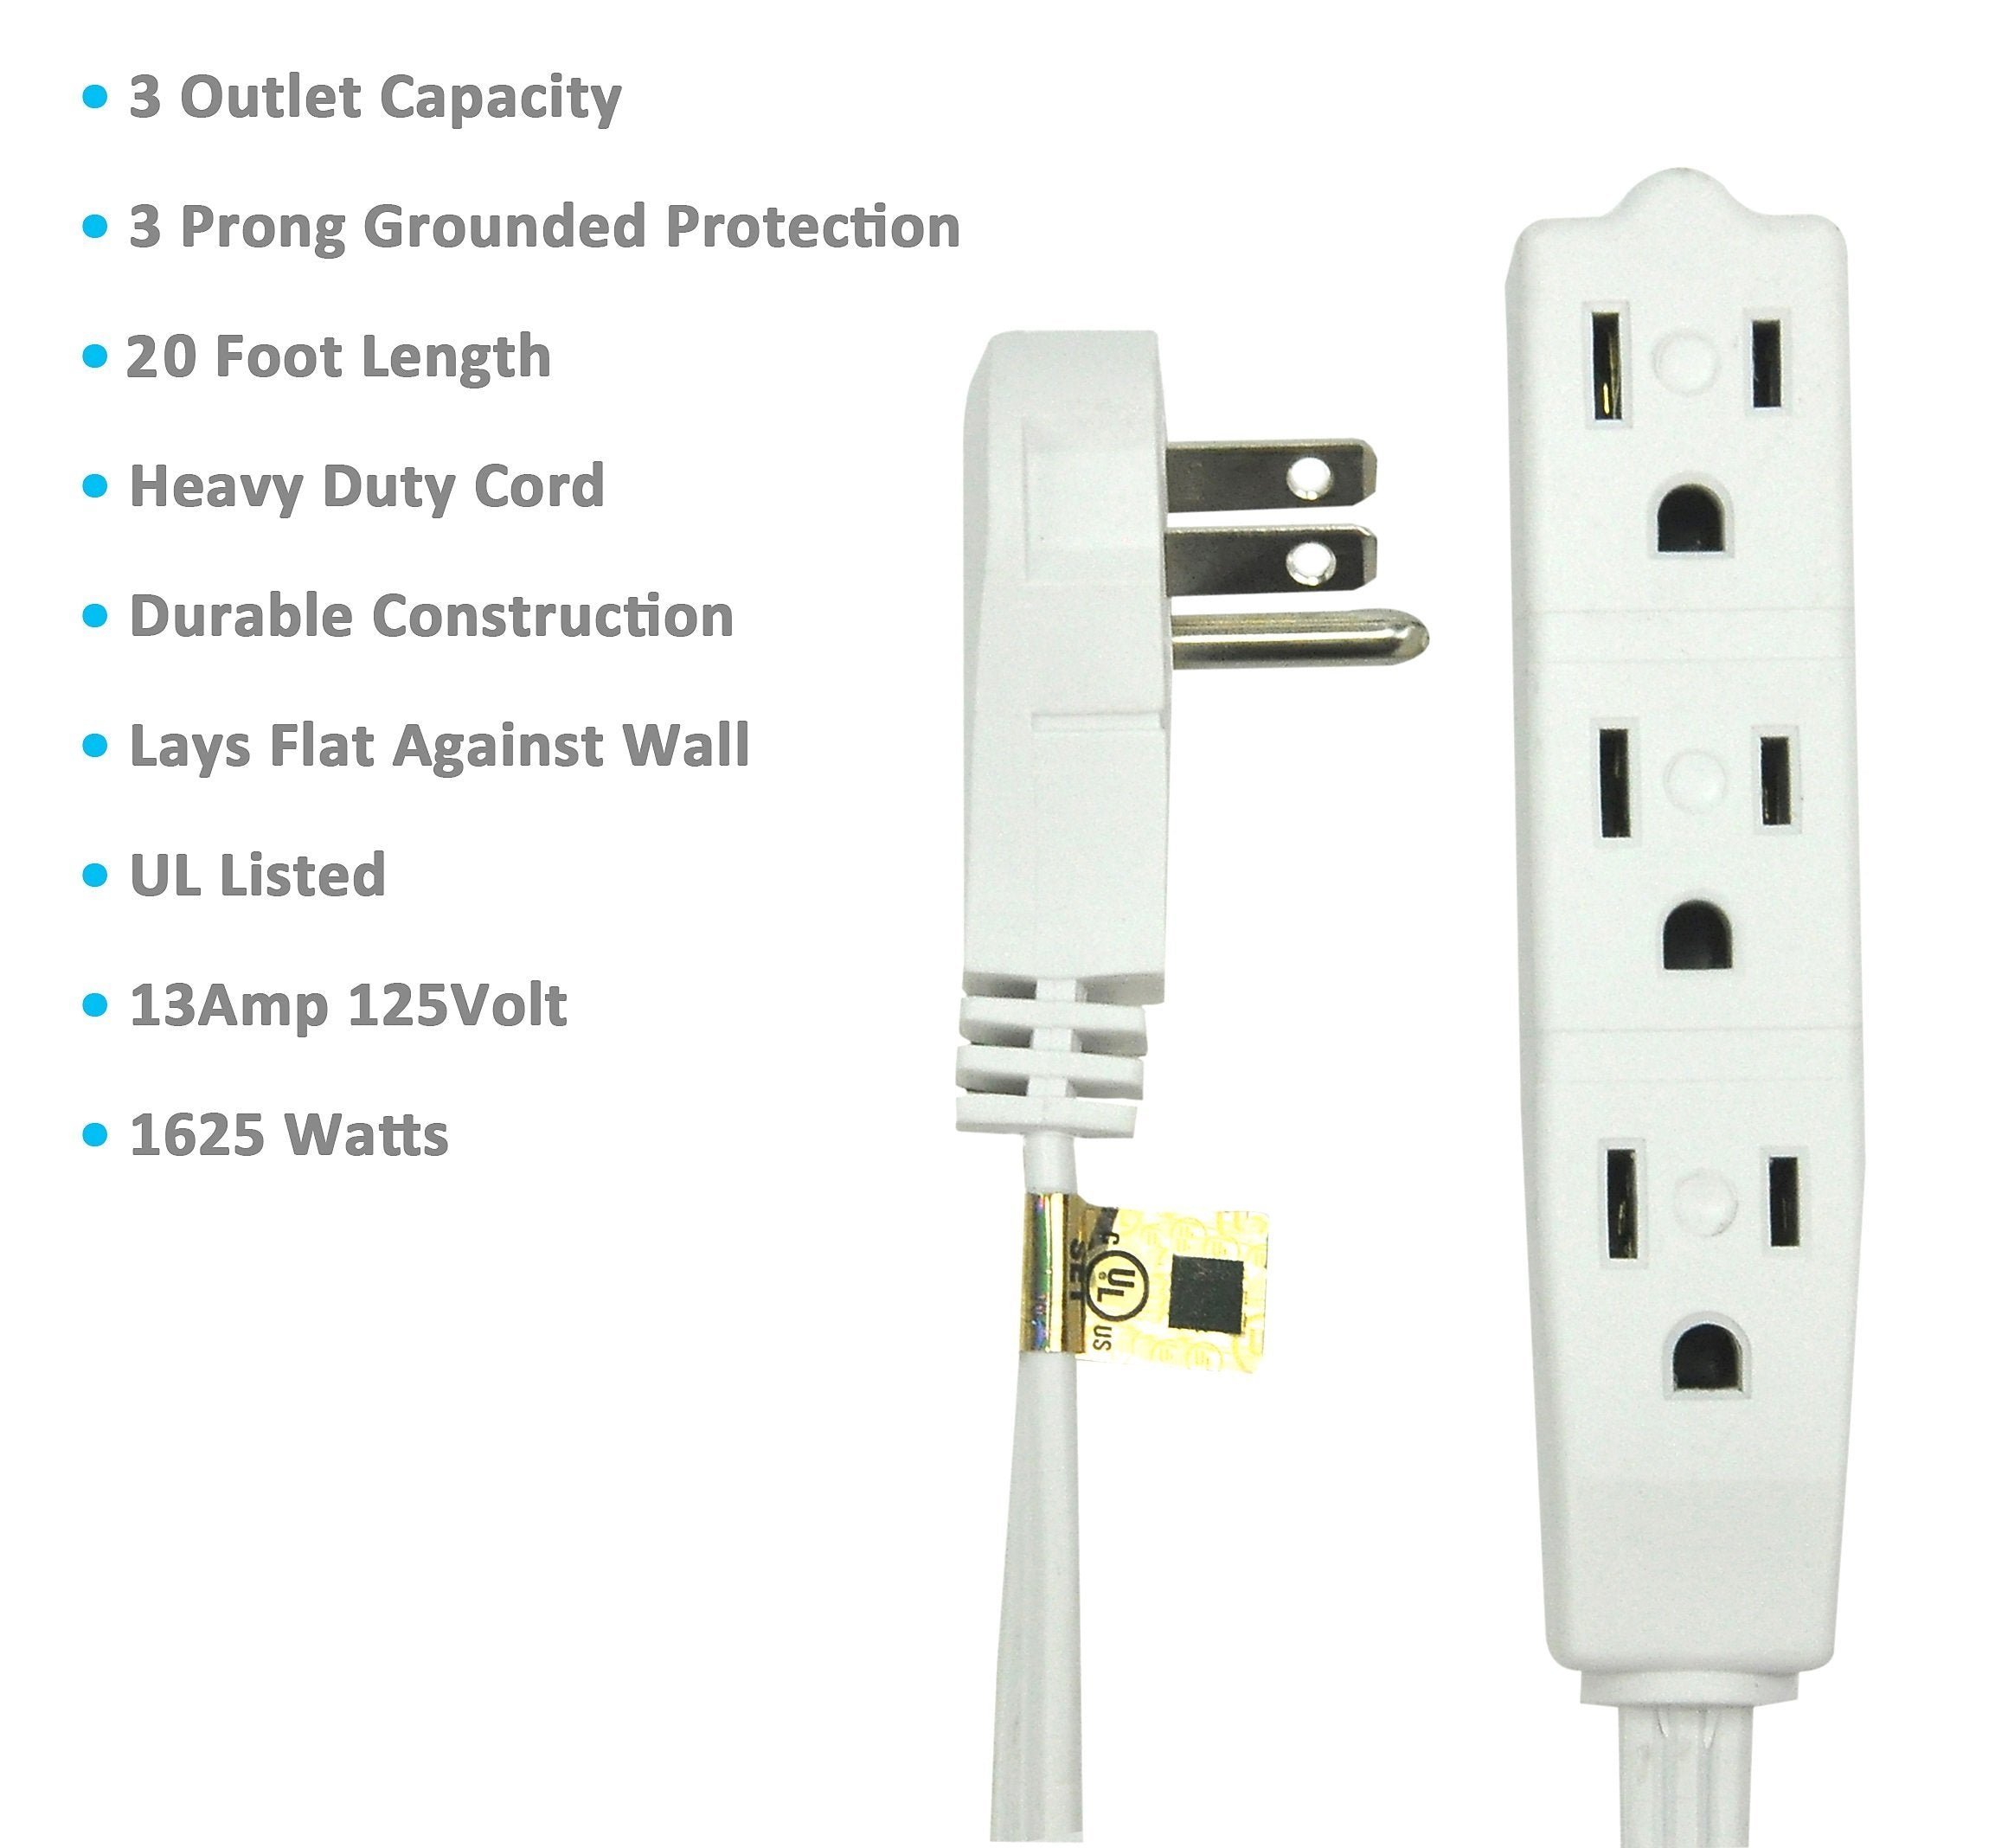 20FT Extension Cord 3 Outlets 3 Prong - White - BindMaster (3 Pack)